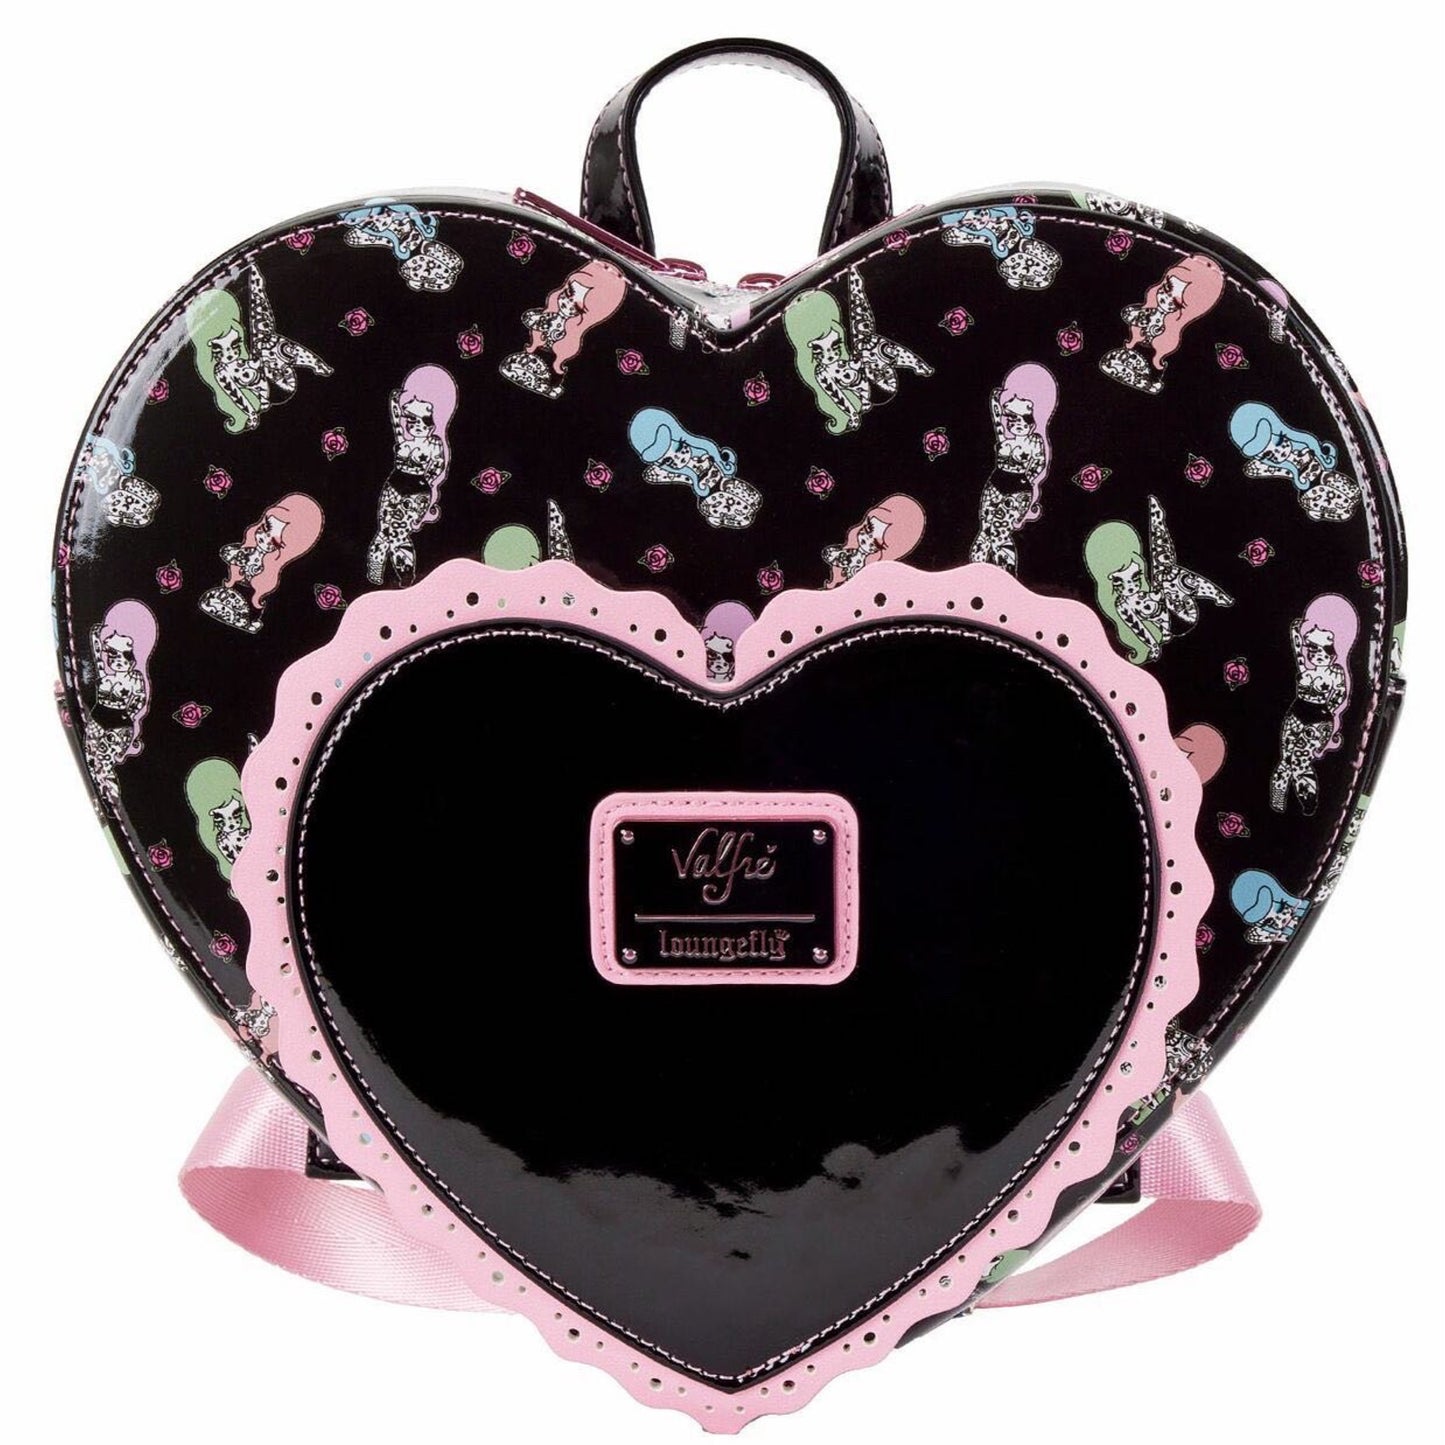 Loungefly Valfré Bad Bettie Tattoo Heart Mini Backpack